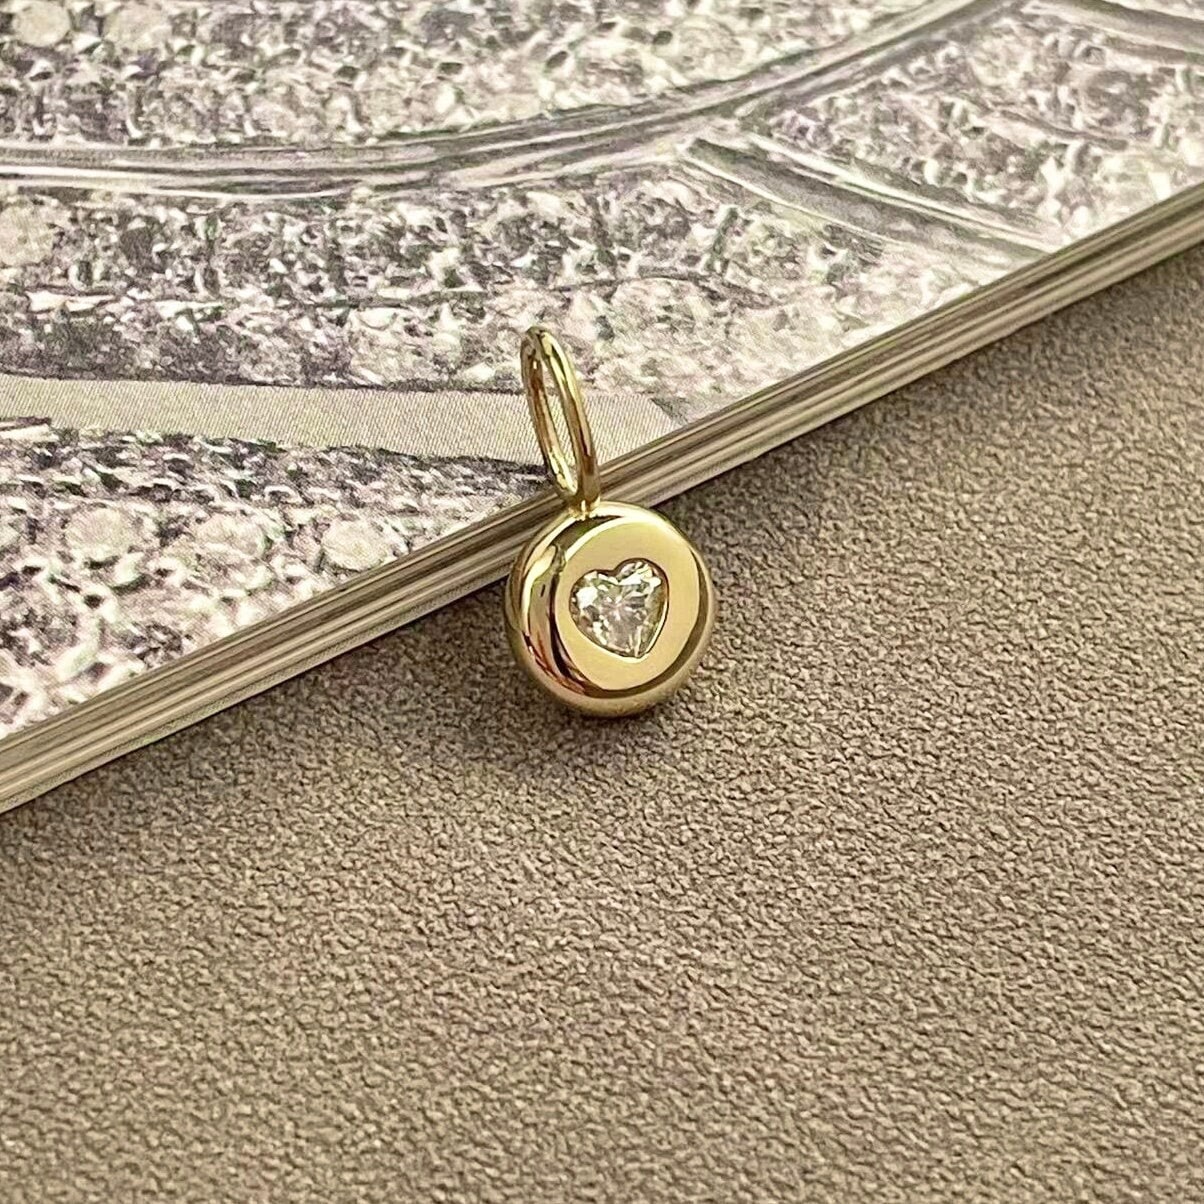 Ready to ship! 14K Solid Gold Dainty Solitaire Moissanite Diamond Heart Pendant, Dainty Small Necklace Charm, Valentine's Gift for Her